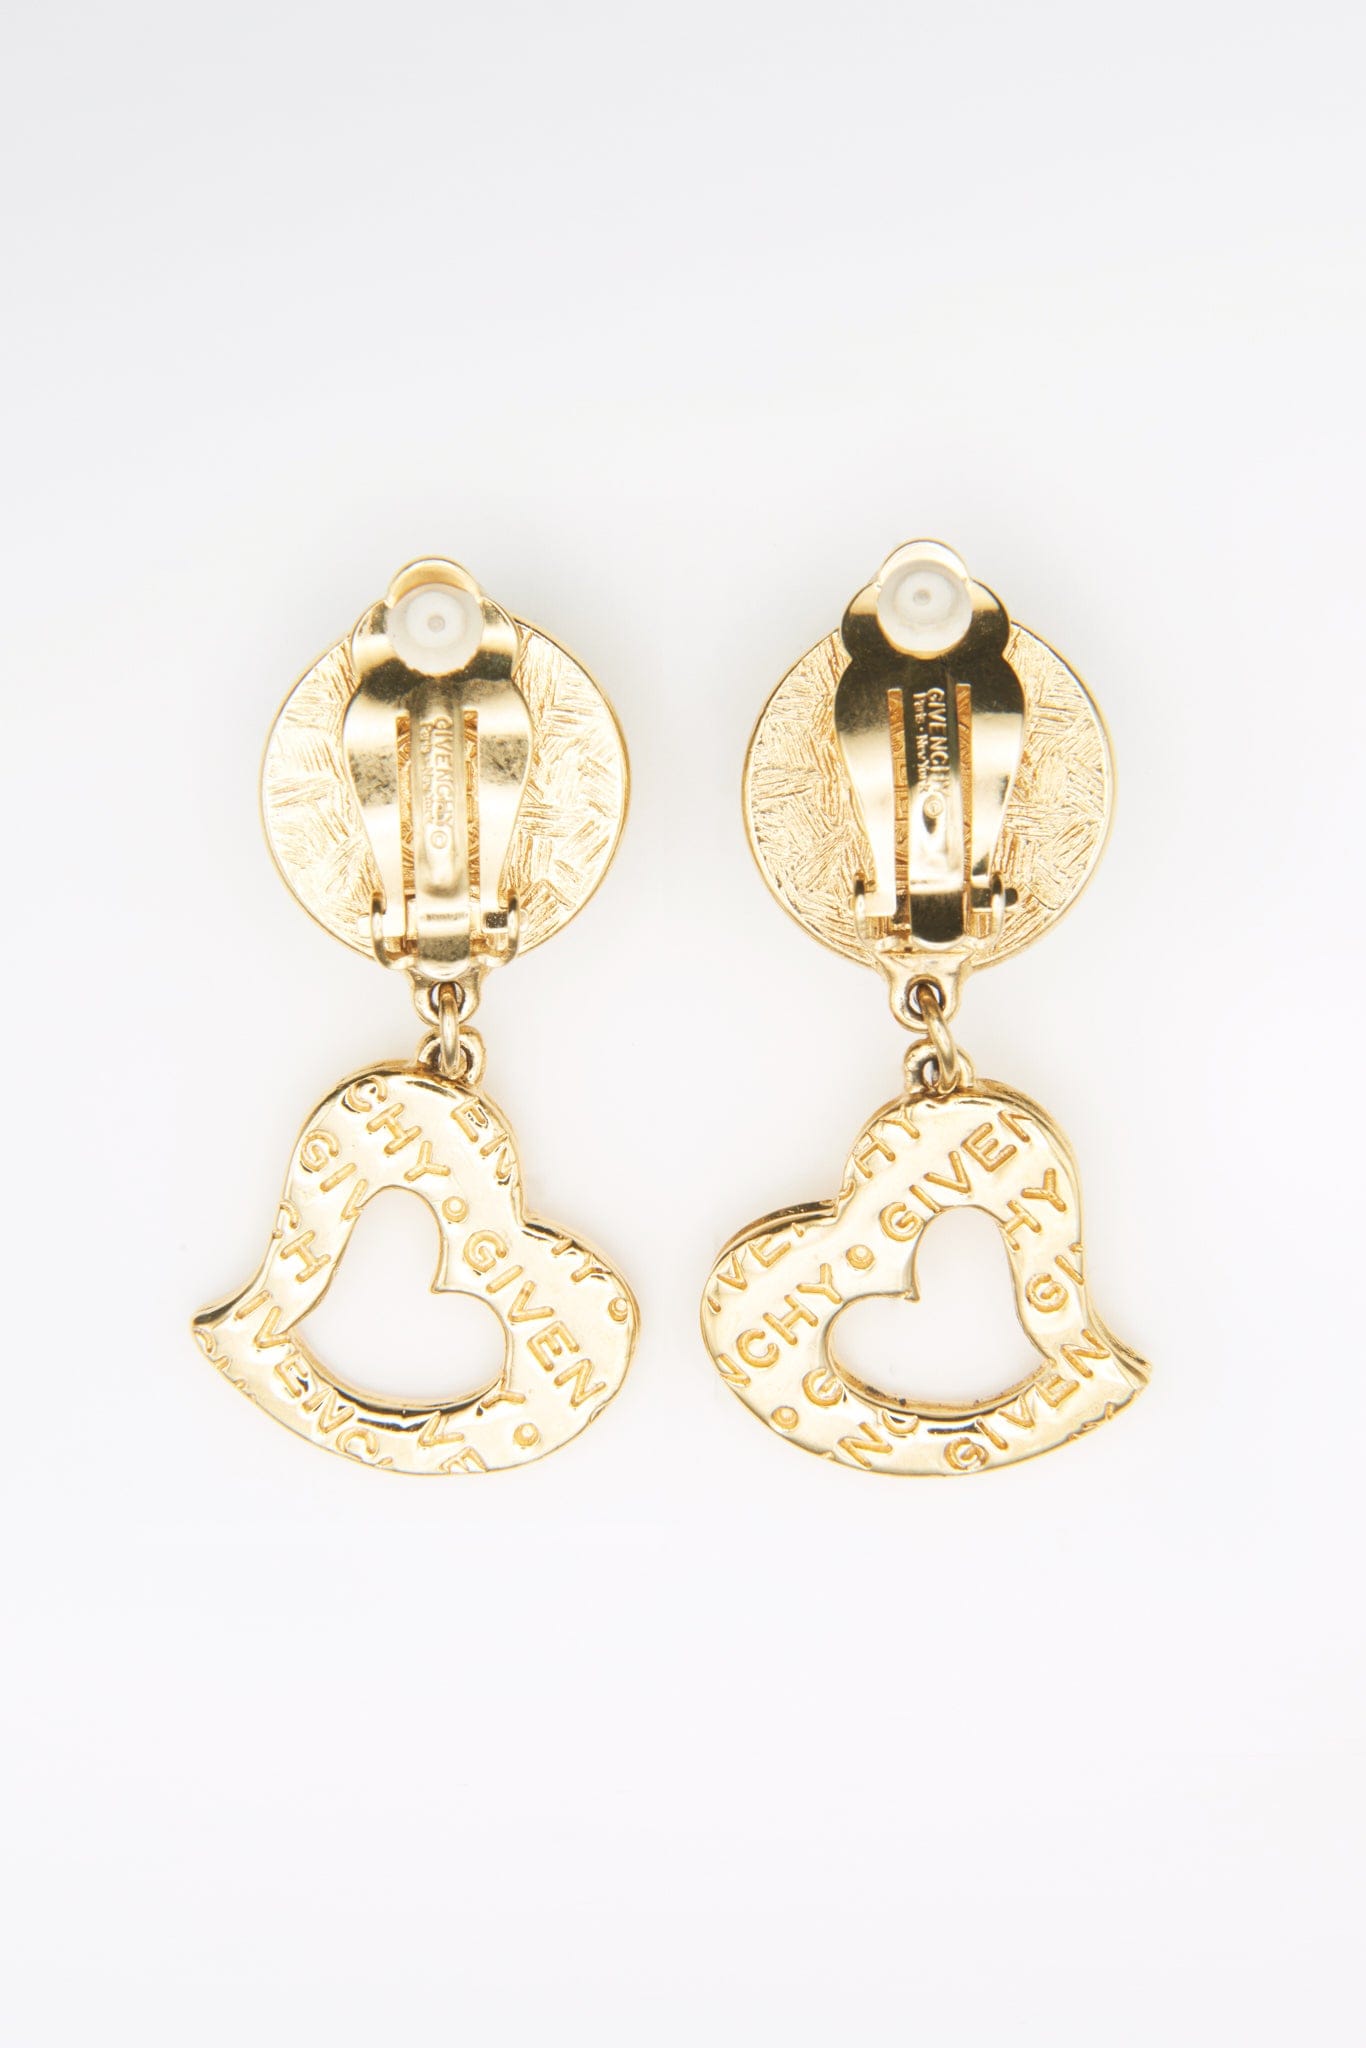 Vintage Gold Givenchy Heart and Imitation Pearl Drop Earrings